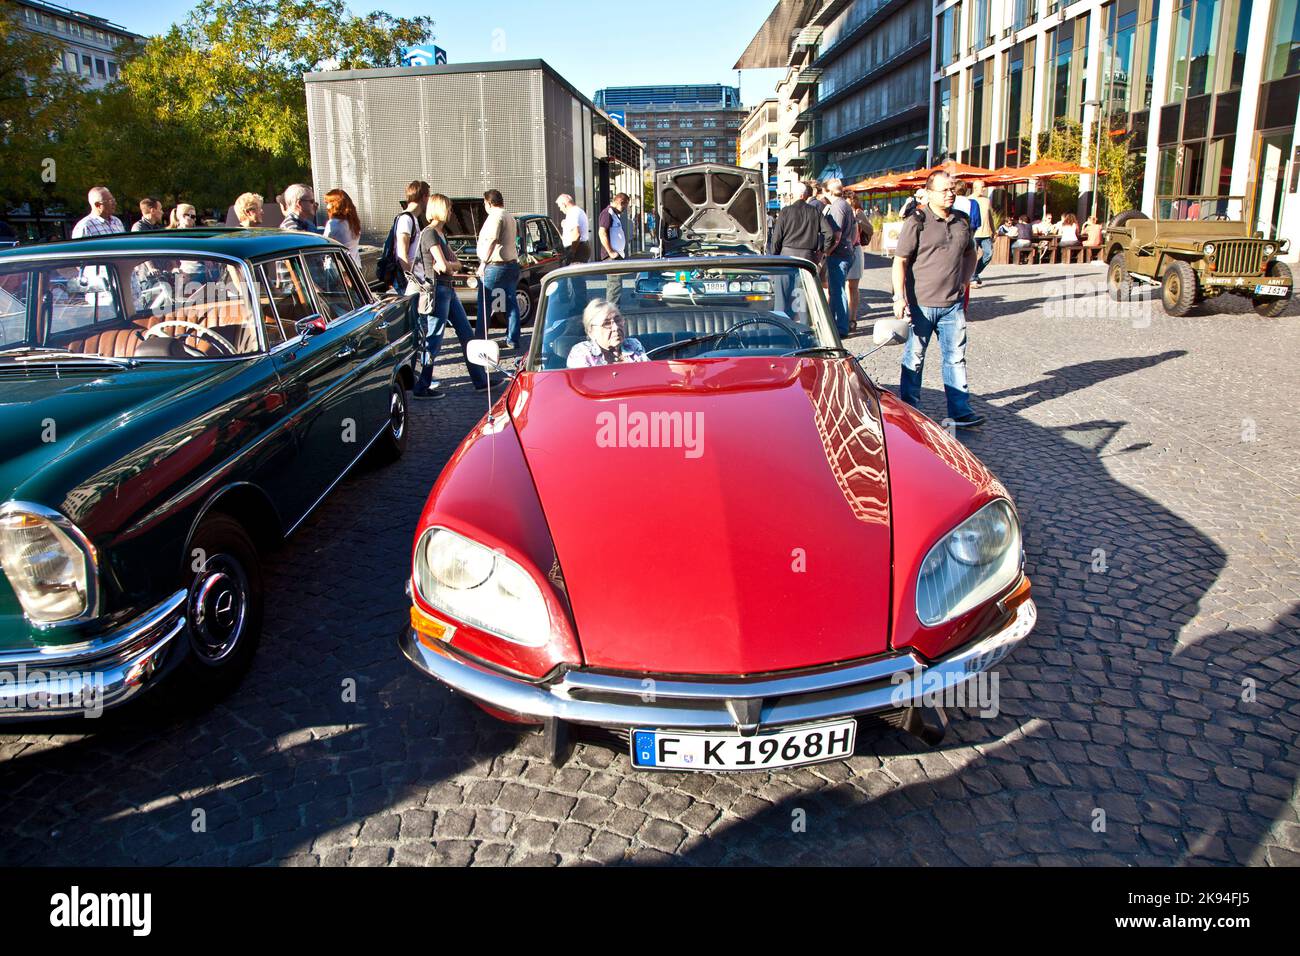 Frankfurt, Germany - October 2,2011:   Oldtimer Meeting in Frankfurt, Germany. A Citroen CV Oldtimer presented by the event '7. Oldtimercity' organize Stock Photo